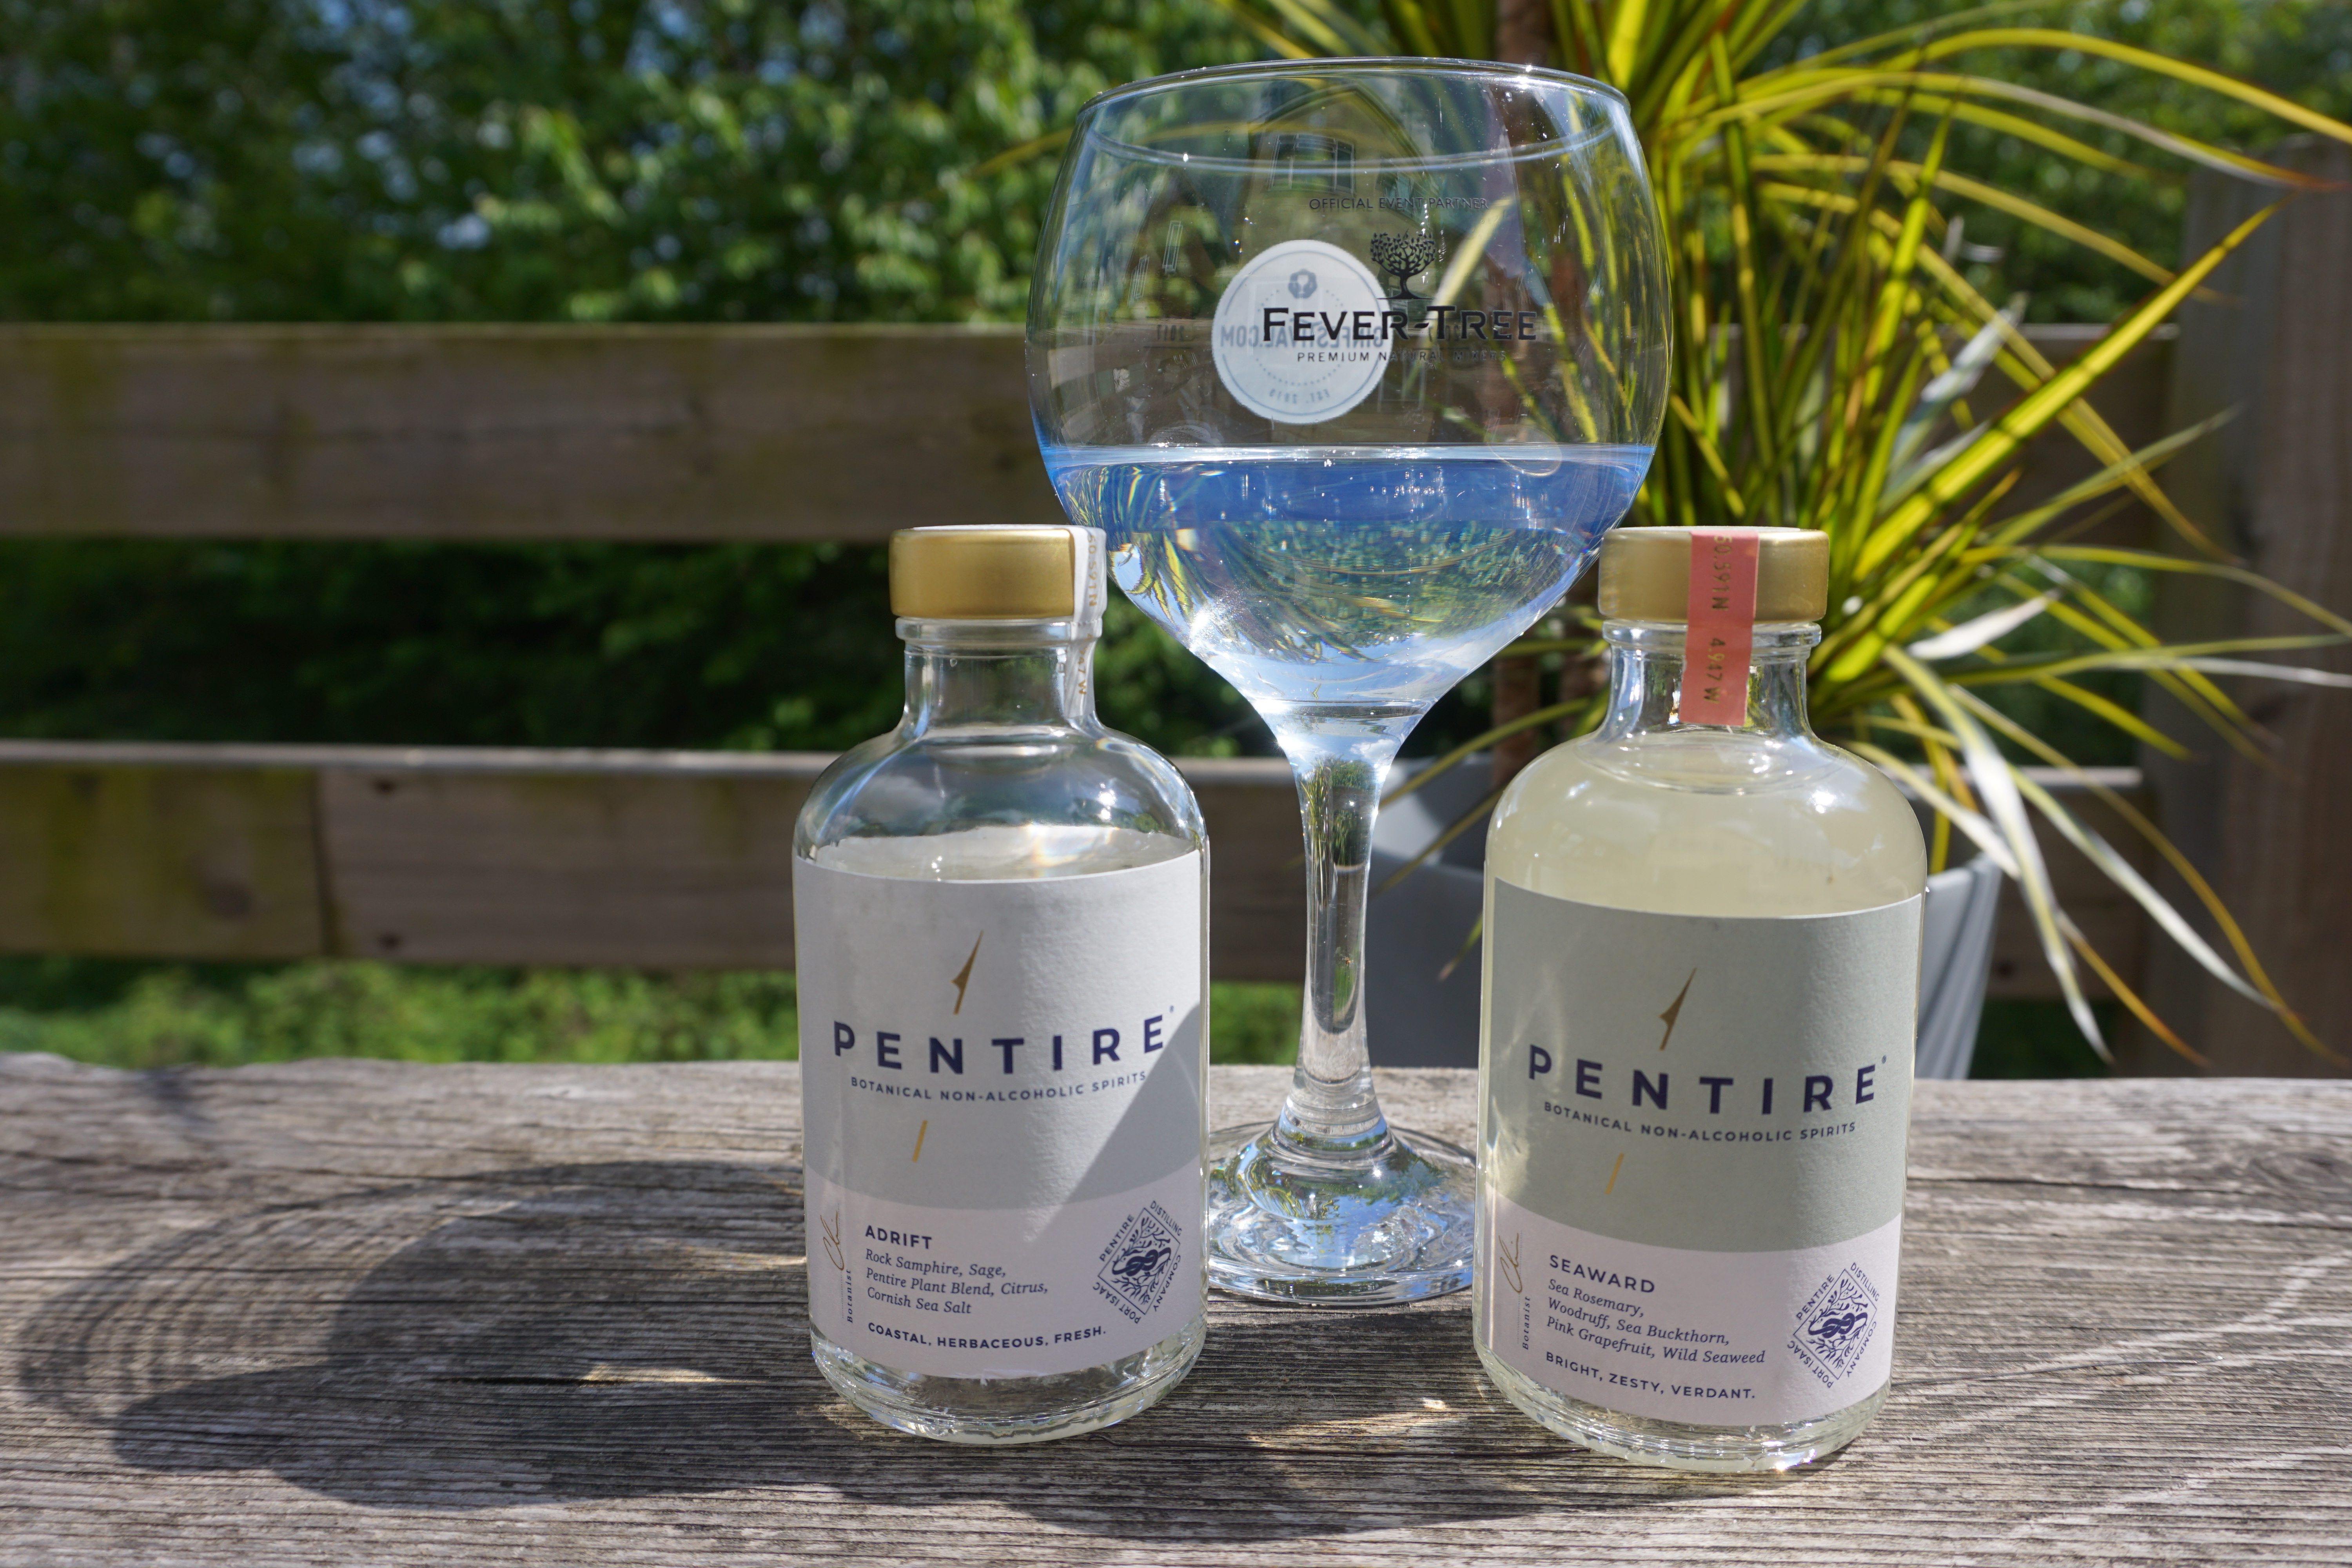 Pentire non-alcoholic spirits displayed in small see through glass bottles in front of a glass with greenery behind